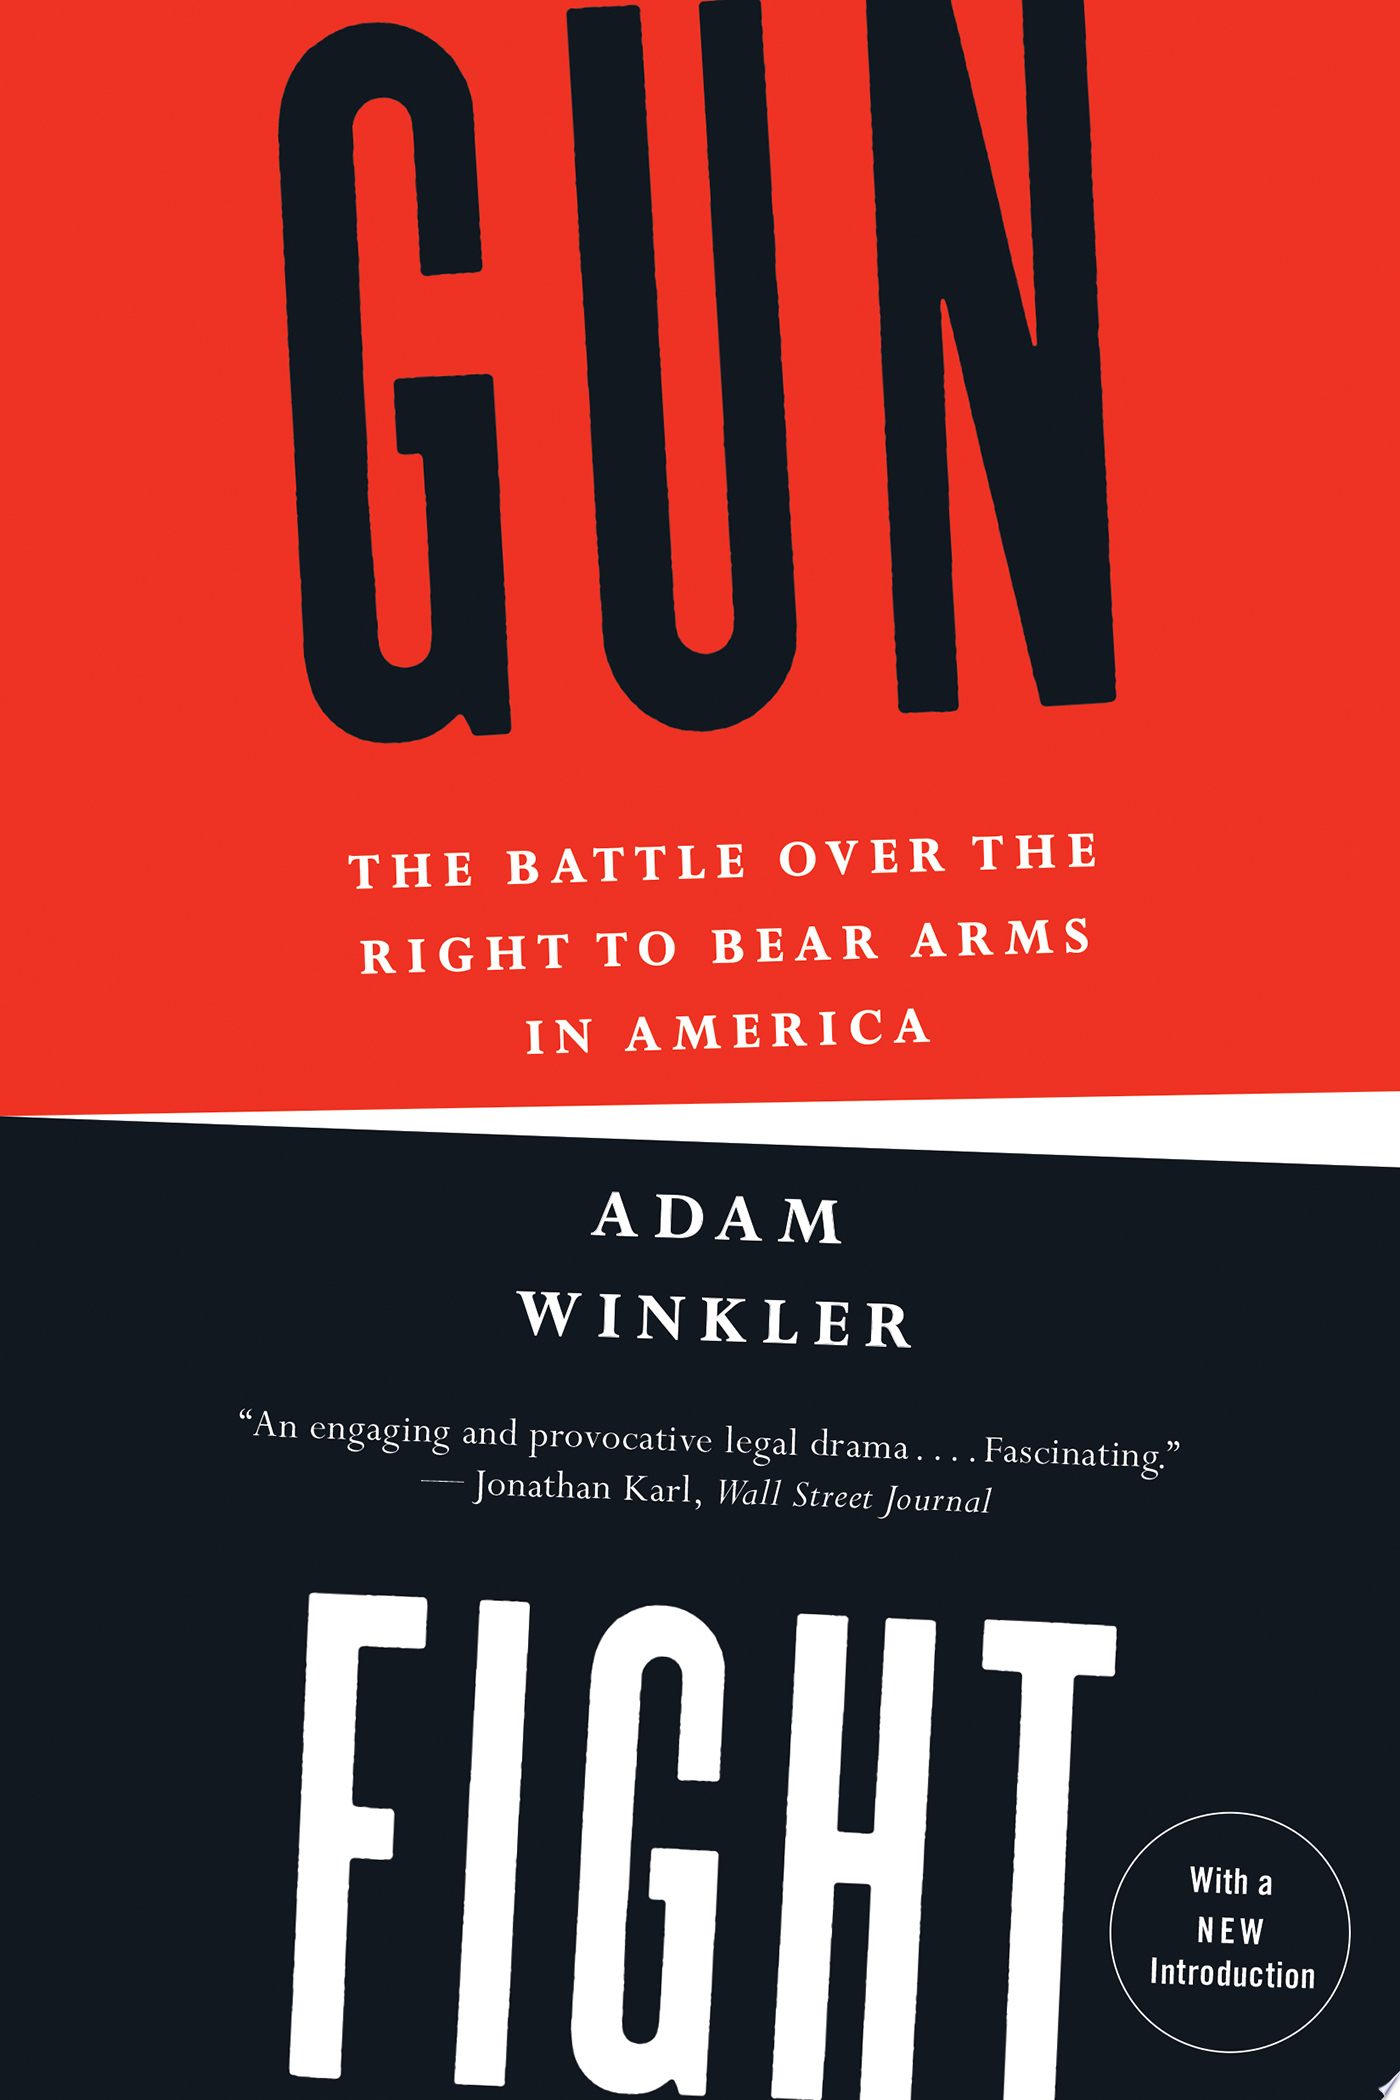 Image for "Gunfight: The Battle Over the Right to Bear Arms in America"